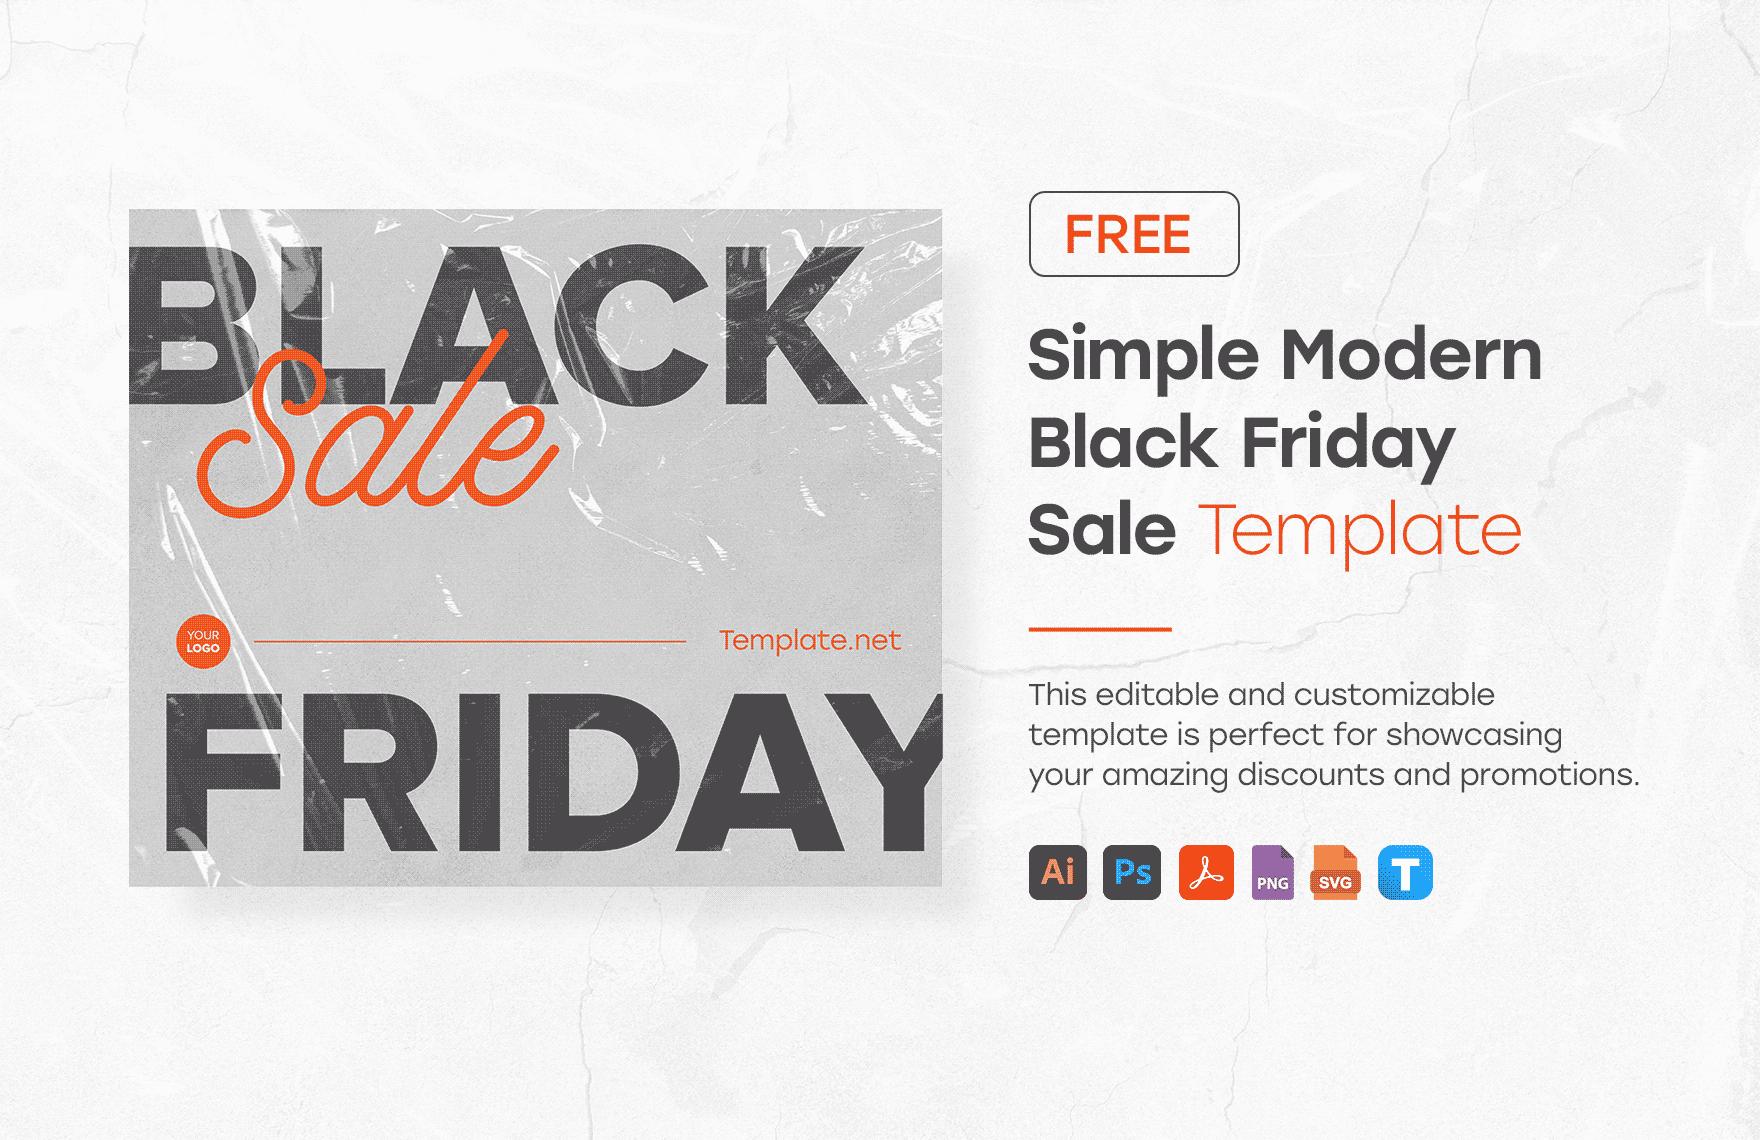 https://images.template.net/wp-content/uploads/2016/10/Simple-Modern-Black-Friday-Sale-Template.png